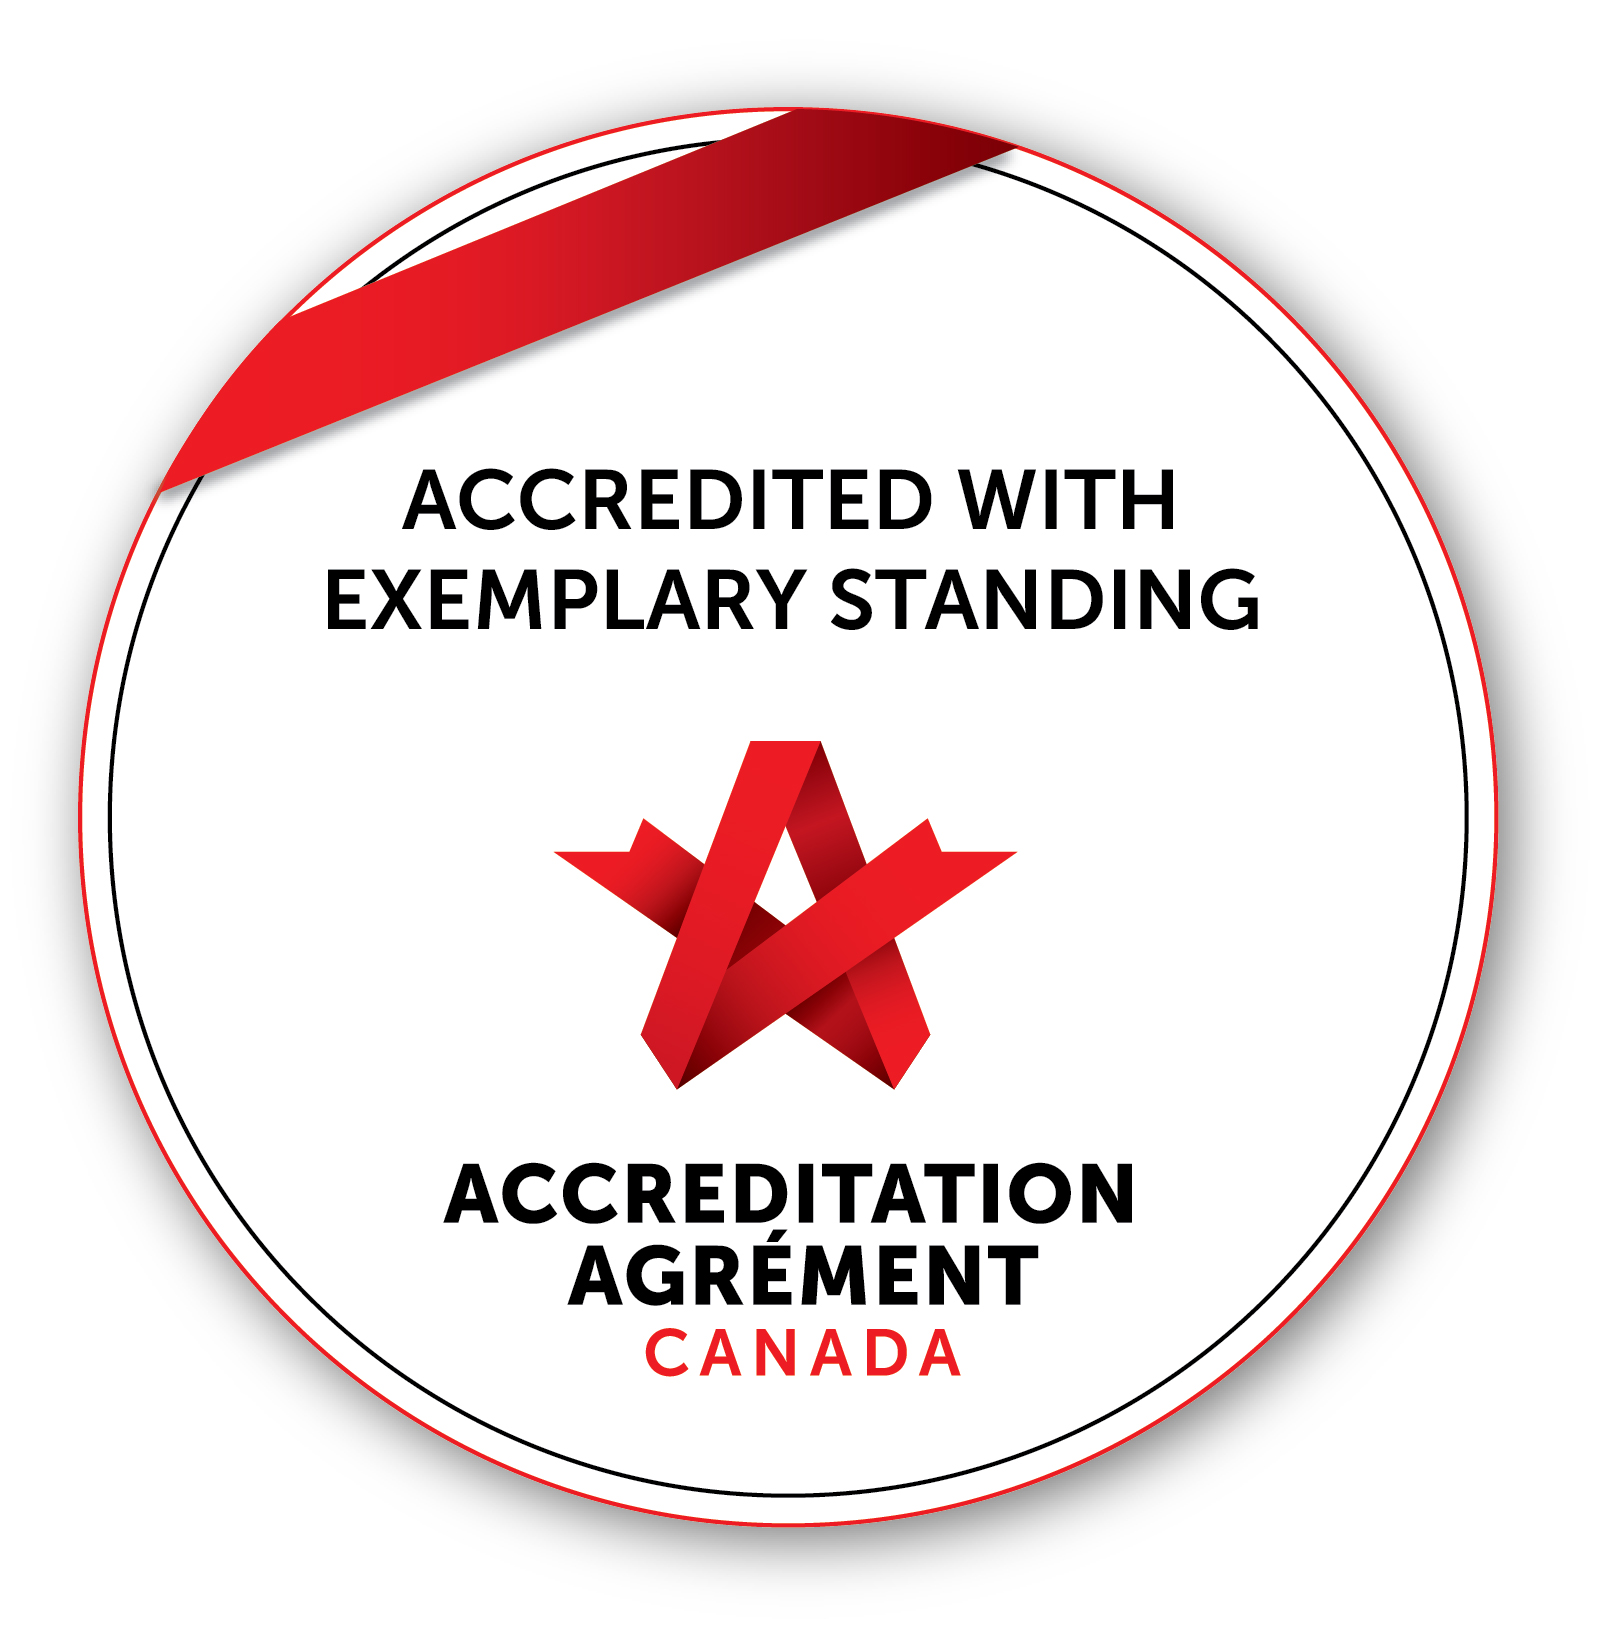 Accreditation with Exemplary Standing - Accreditation Canada